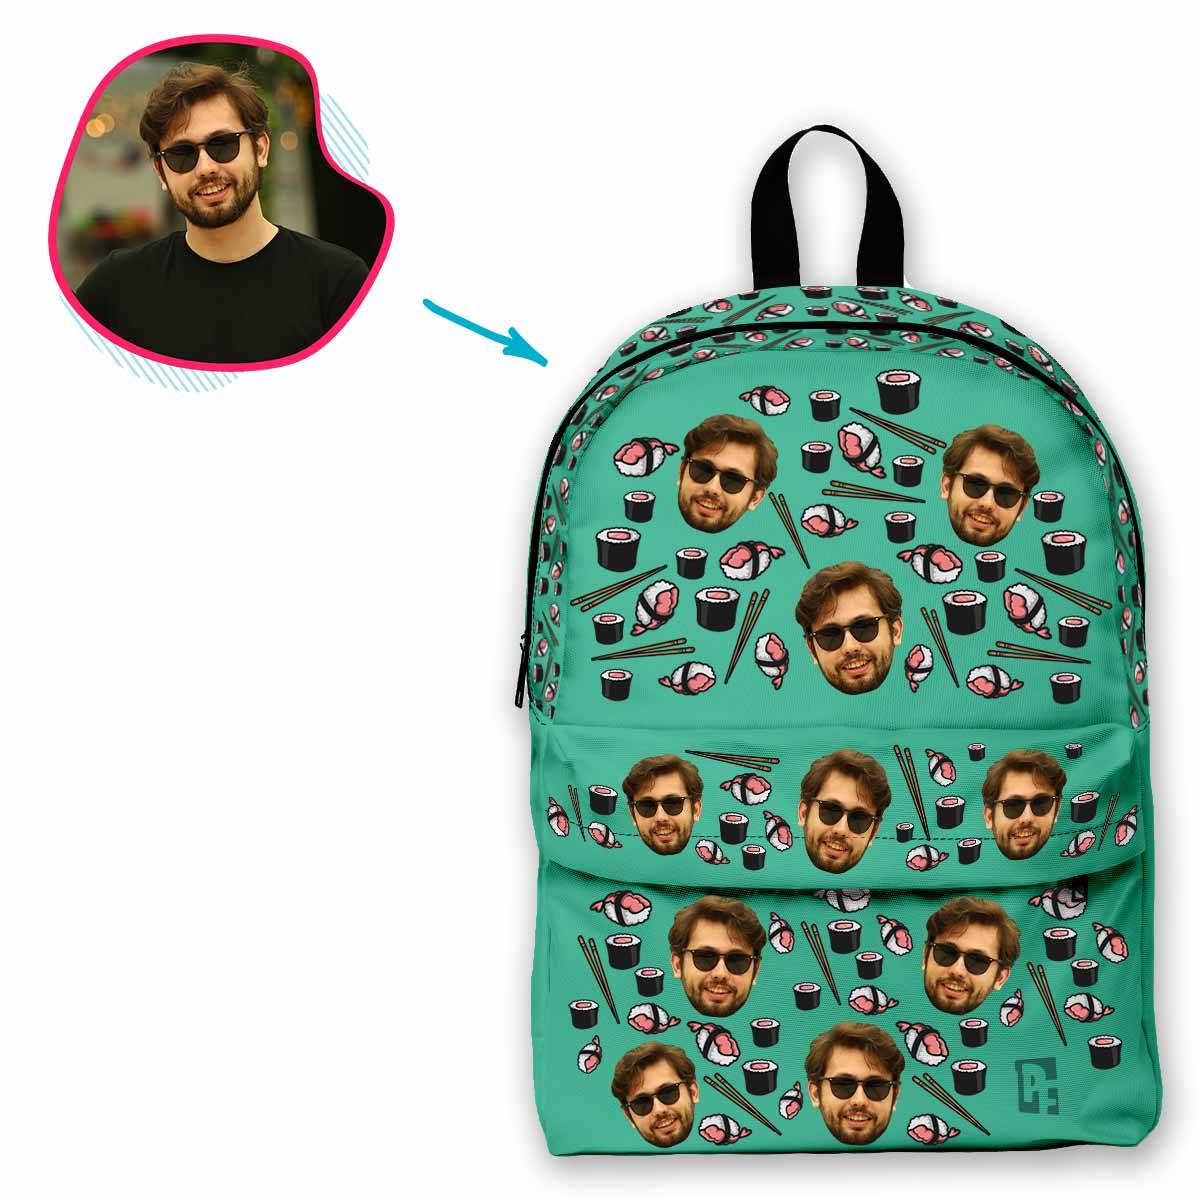 mint Sushi classic backpack personalized with photo of face printed on it